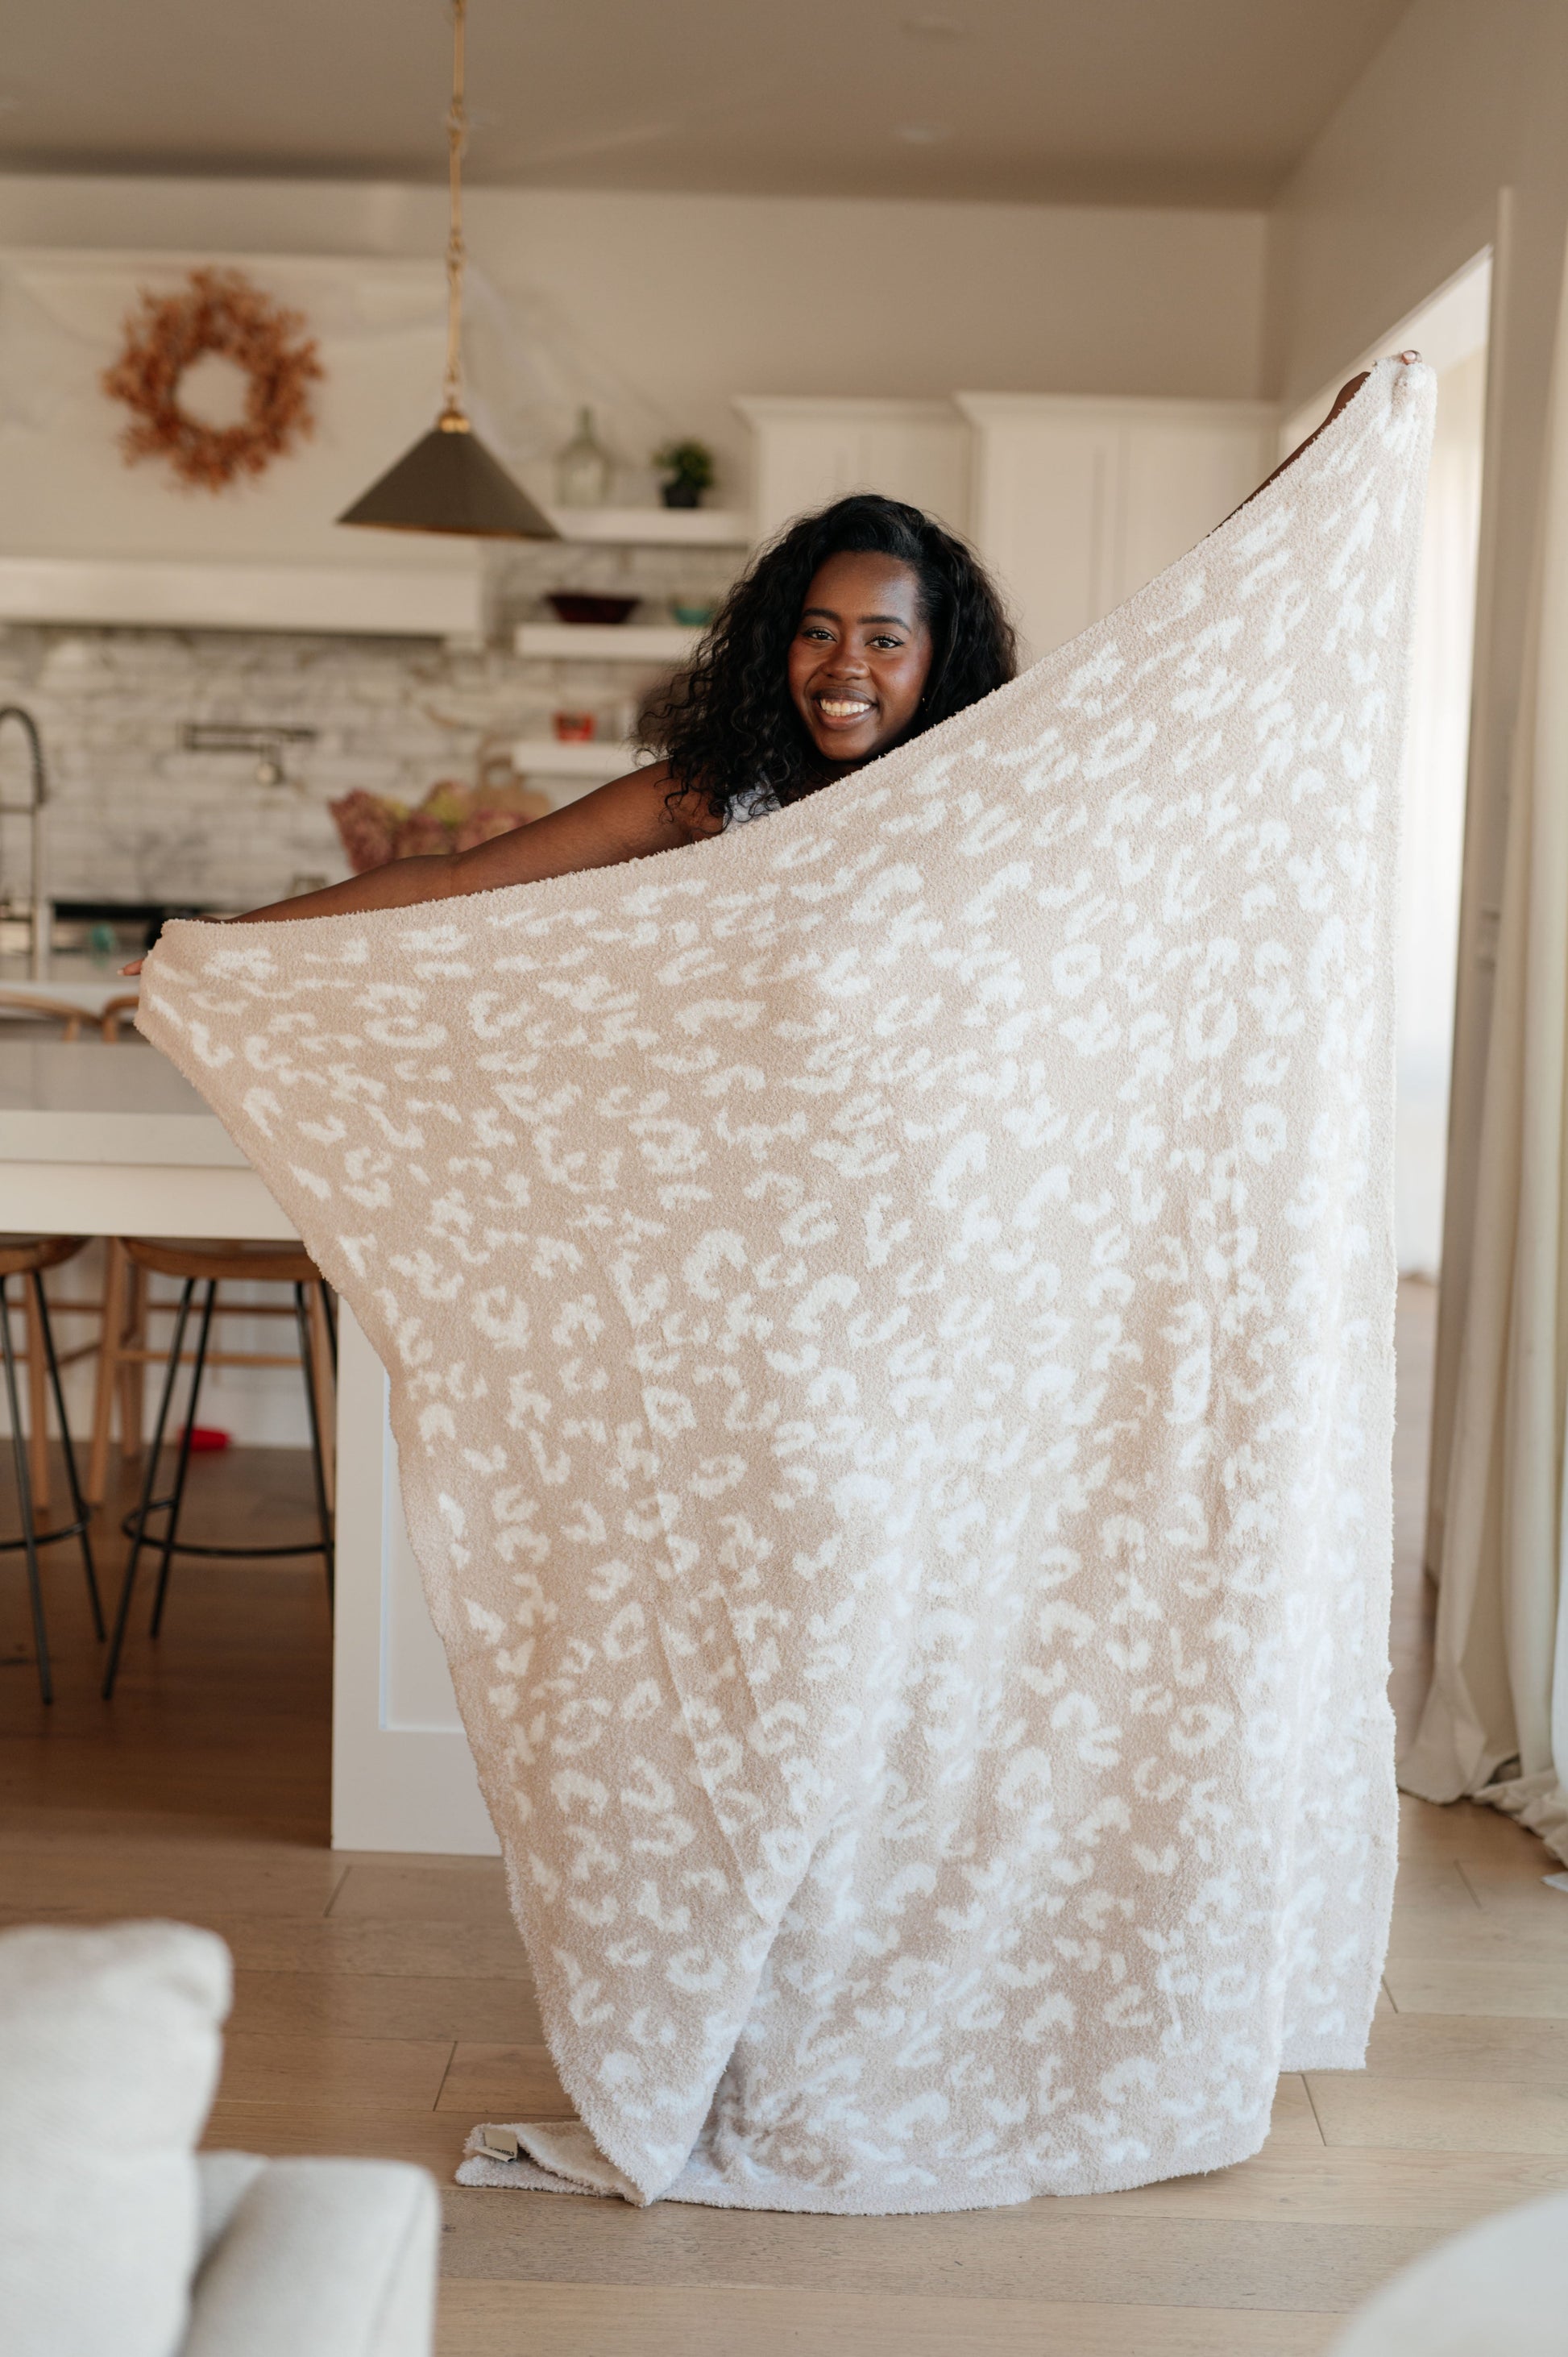 The Ari Blanket by Cuddle Culture is as luxurious as it looks - plush and comfy as a cloud. The deliciously soft fabric is inviting and lightweight, truly comforting on the skin. Just like your favorite teddy bear, only softer. Layer your bed or couch and indulge in cloud-like comfort unlike anything you’ve ever felt before. The Ari is breathable, washable, ultra-soft, and of course, beautiful. A luxurious fabric to keep warm with in colder seasons, but lightweight enough to keep out all year round.